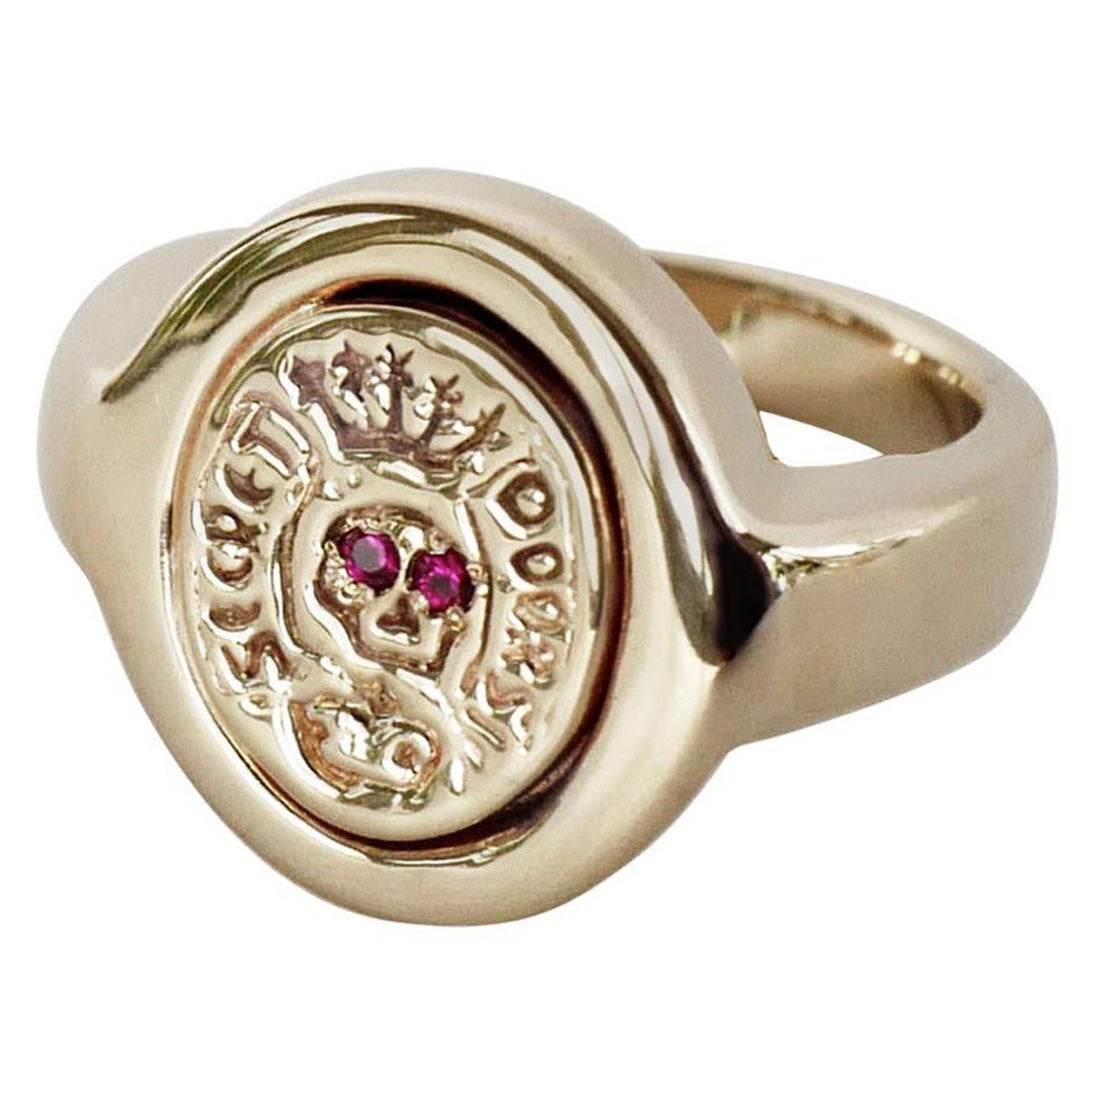 Crest Signet Ring Ruby Skull Bronze Victorian Style J Dauphin For Sale